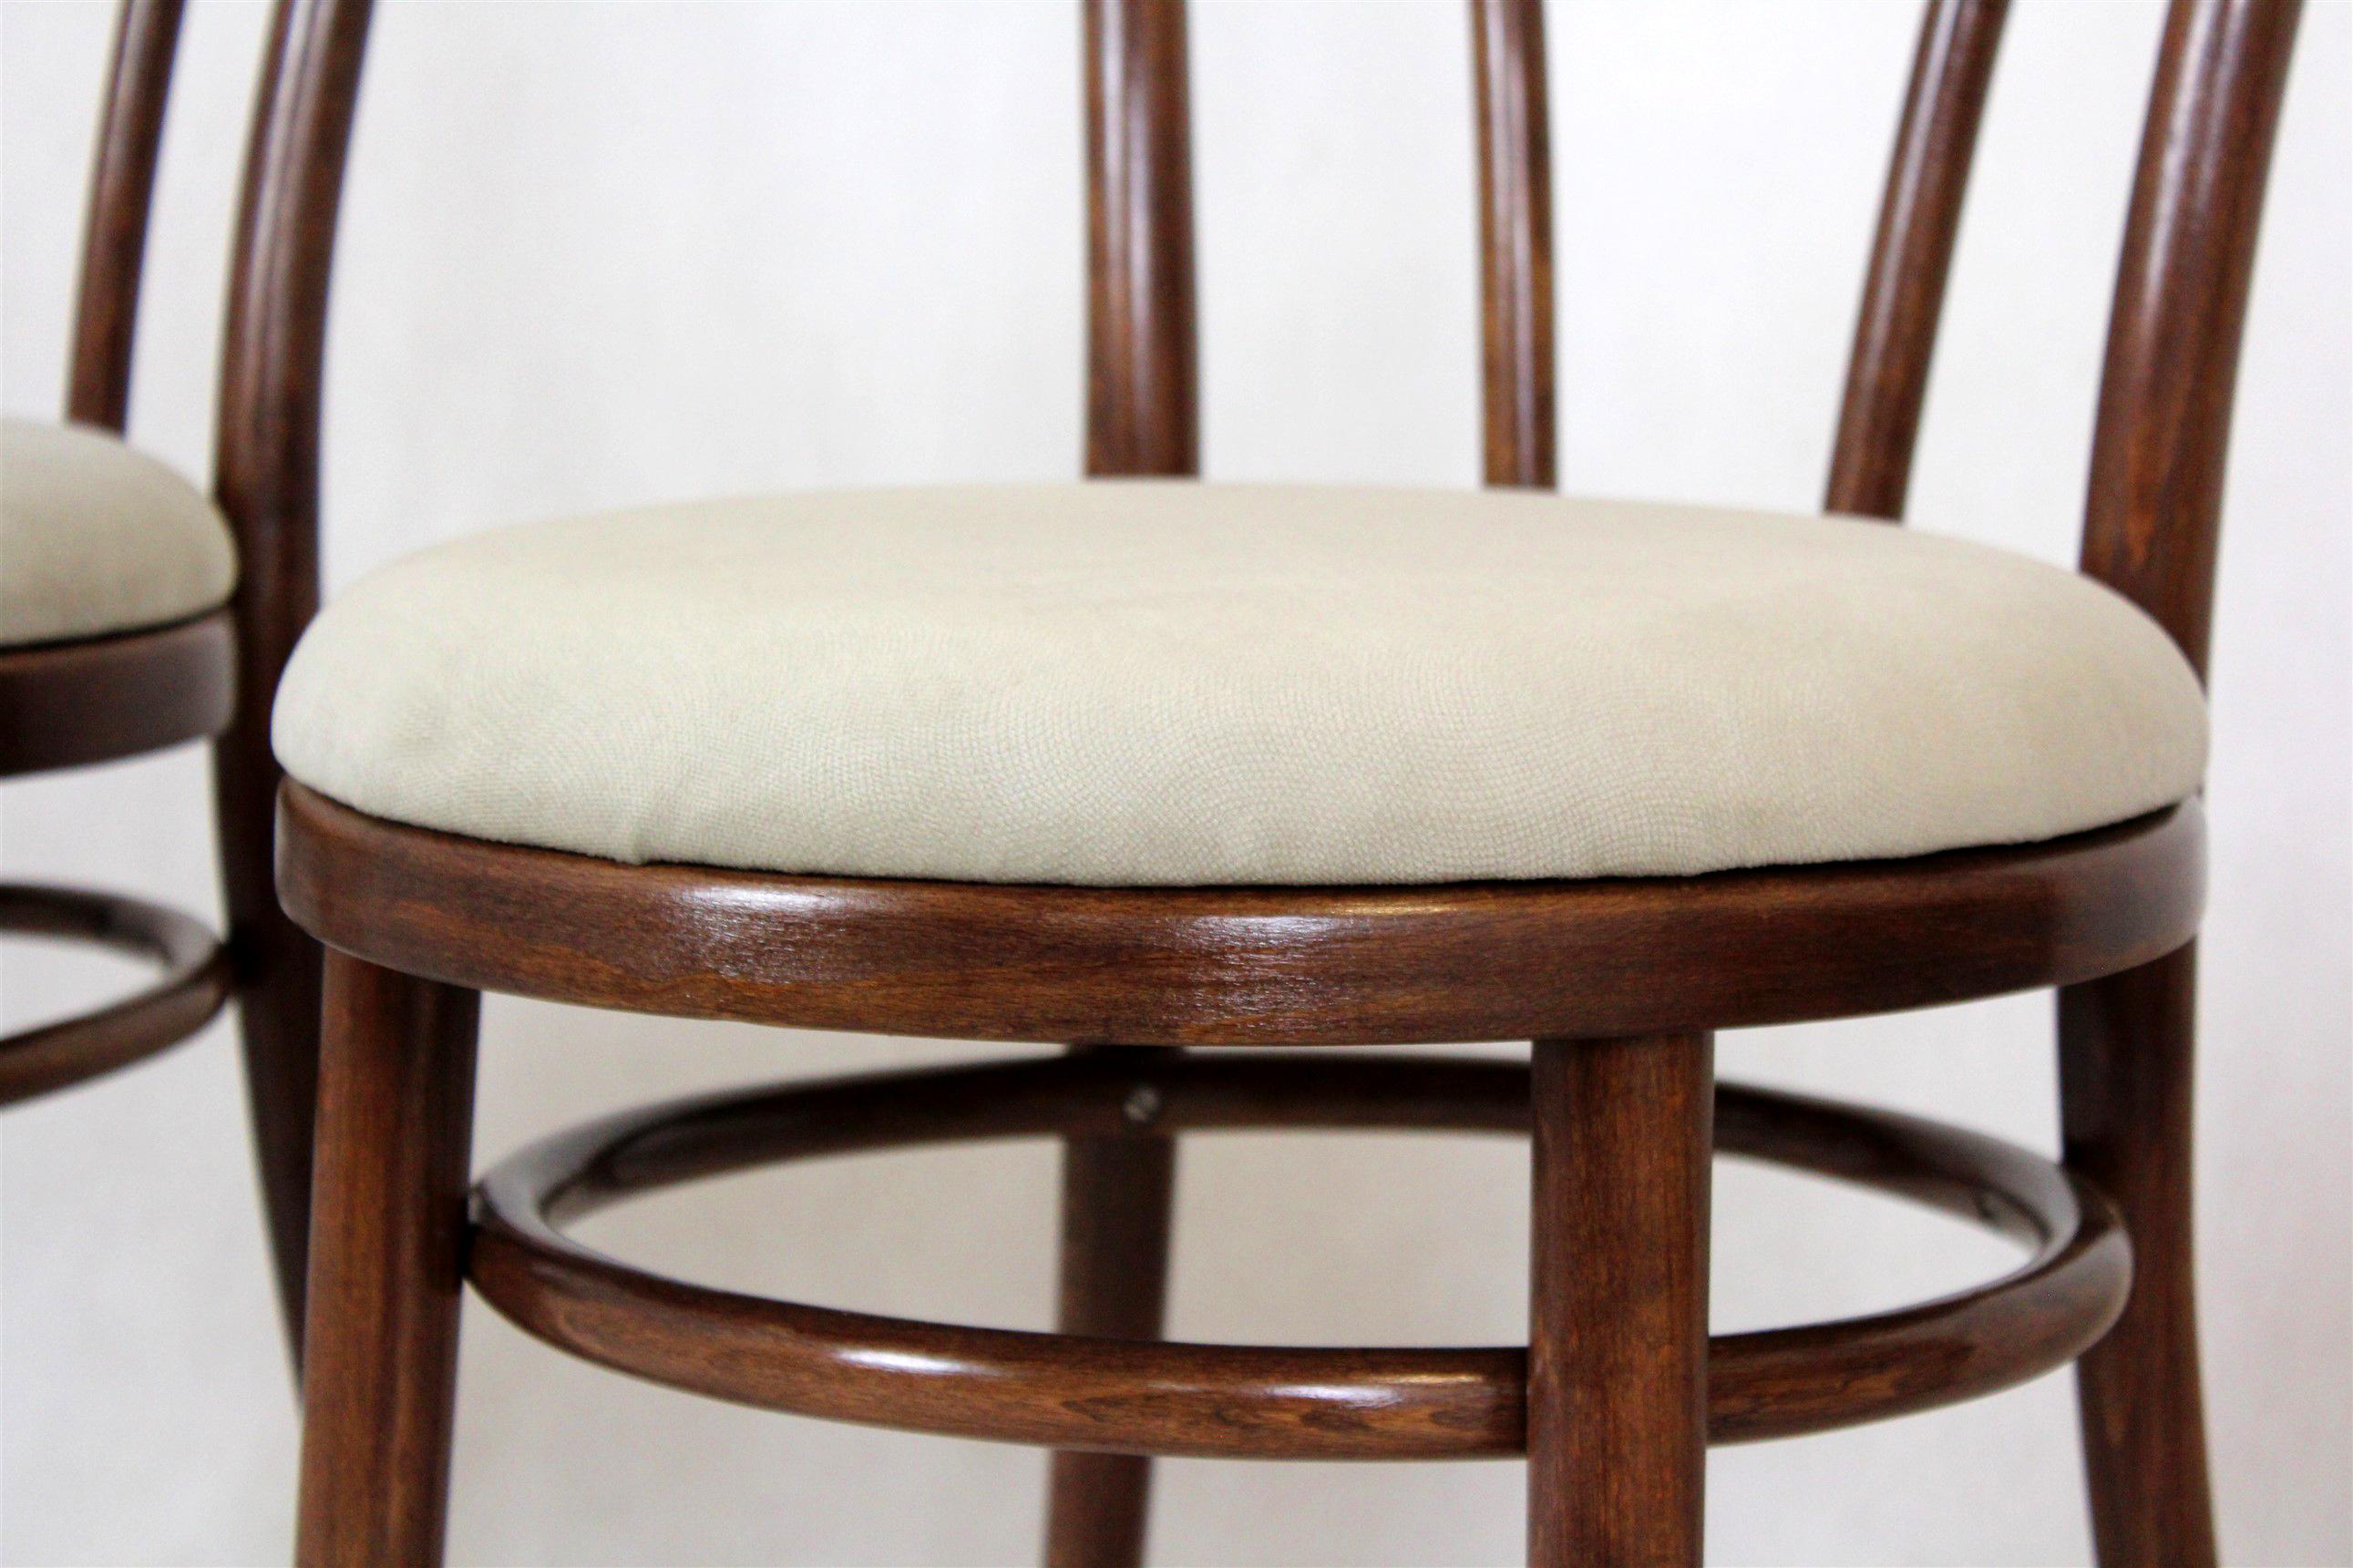 restoring bentwood chairs